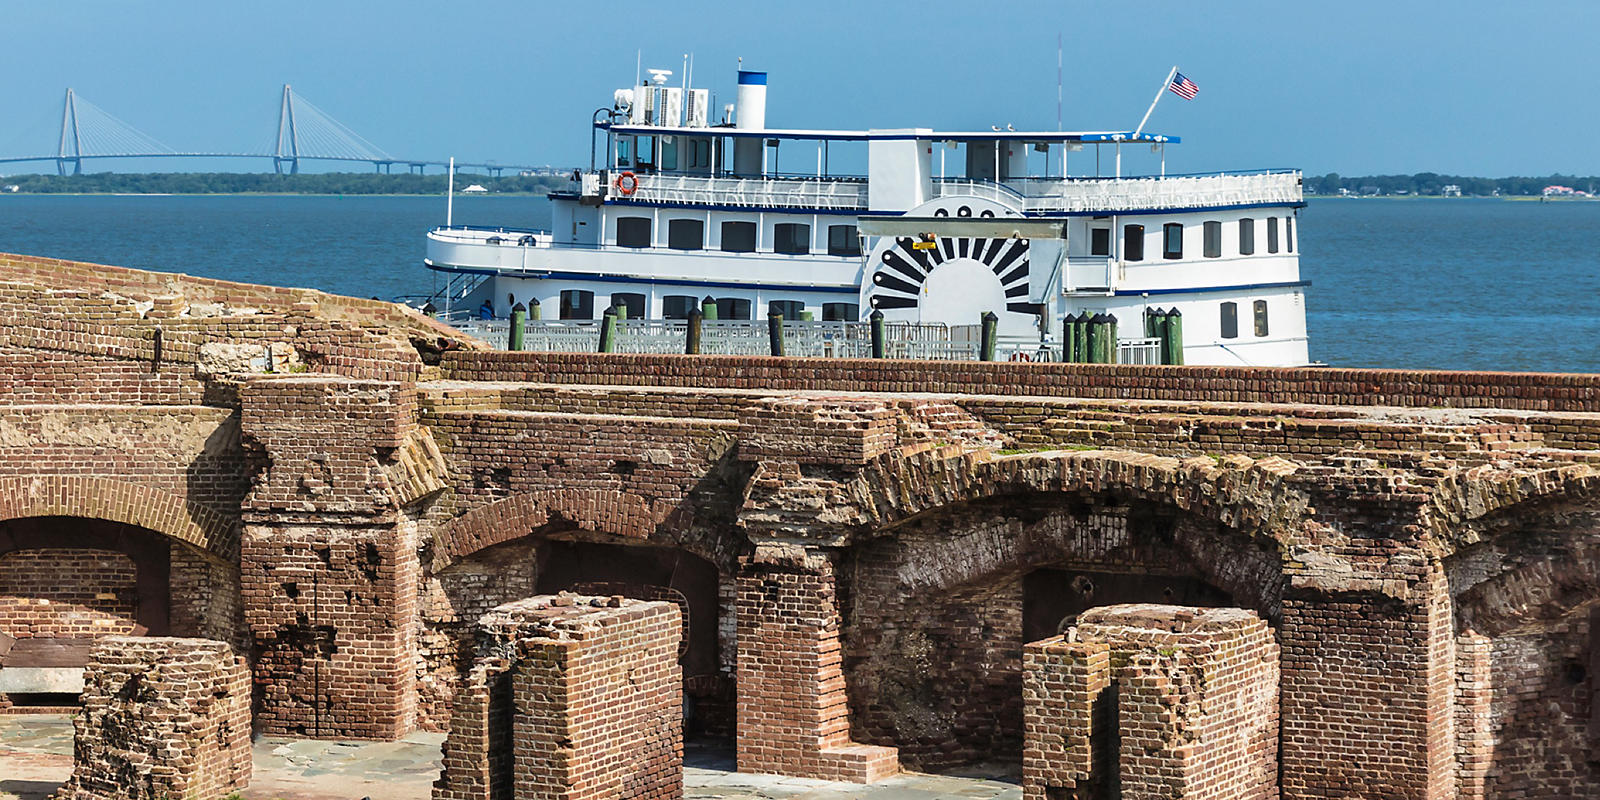 Fort Sumter steamboat